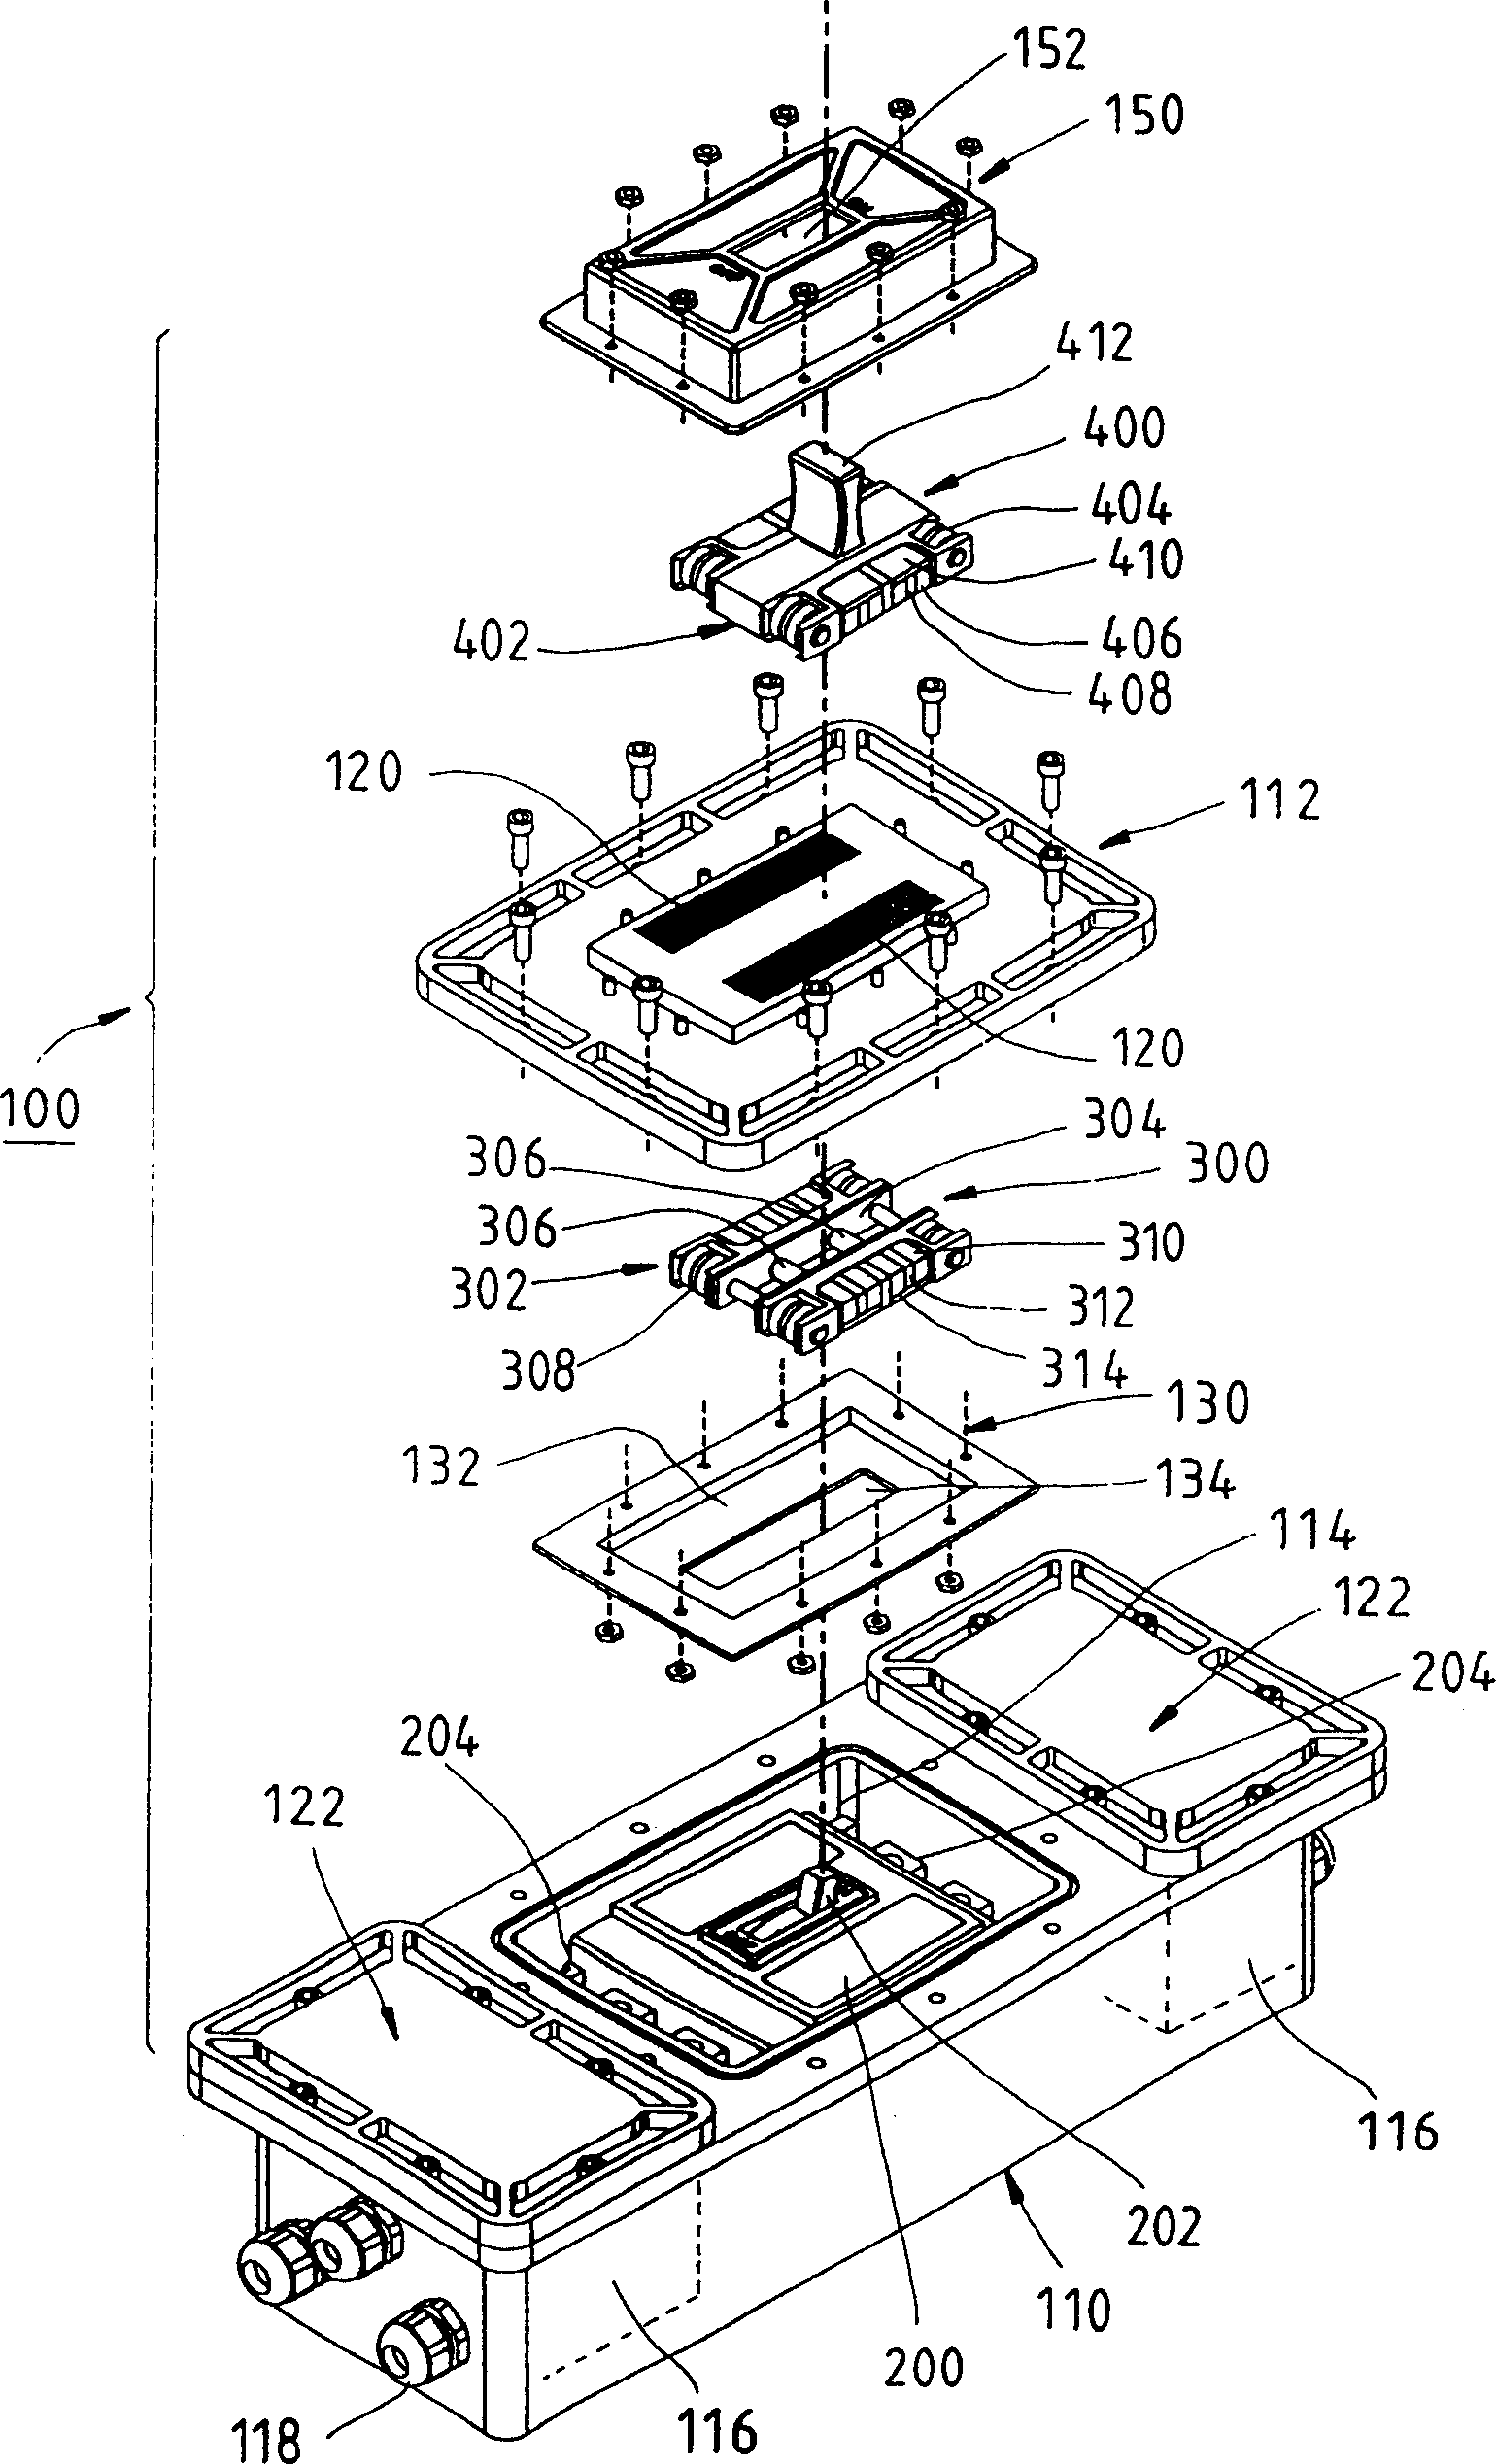 Closed type electrical switch assembly